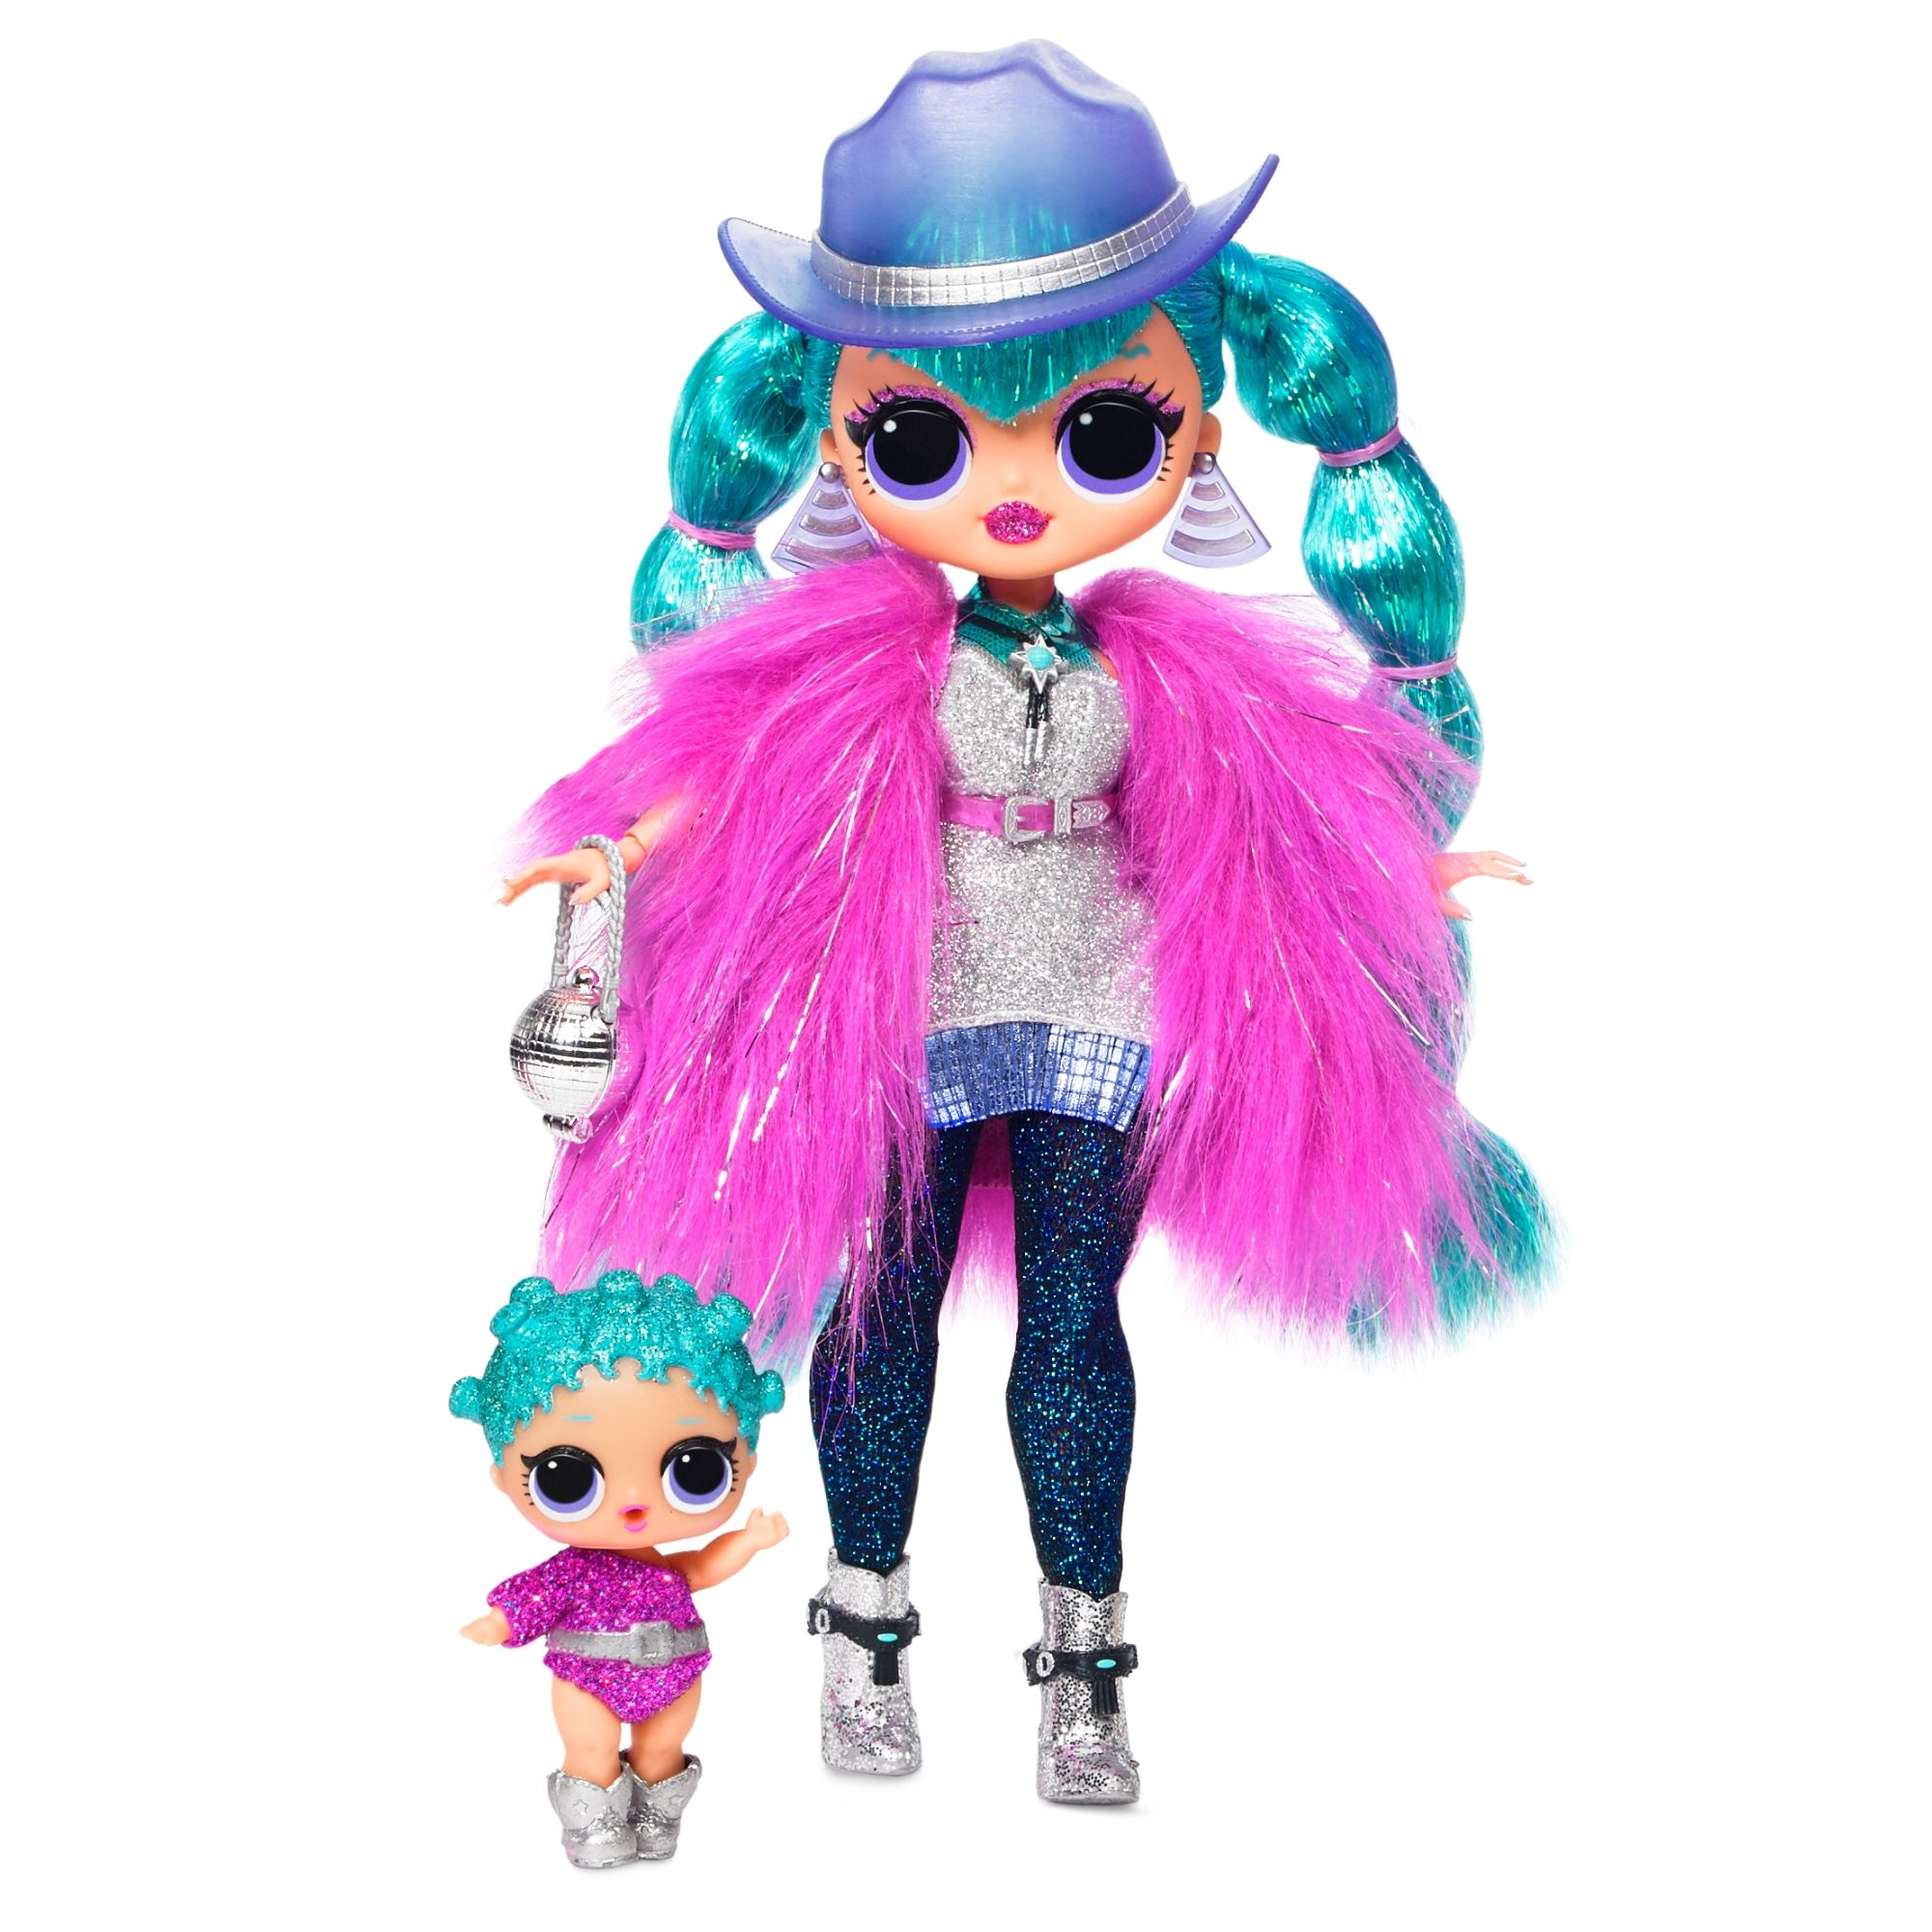 O.L. Surprise! O.M.G. Winter Disco Doll & Sister - £35.00 for Toys and Games